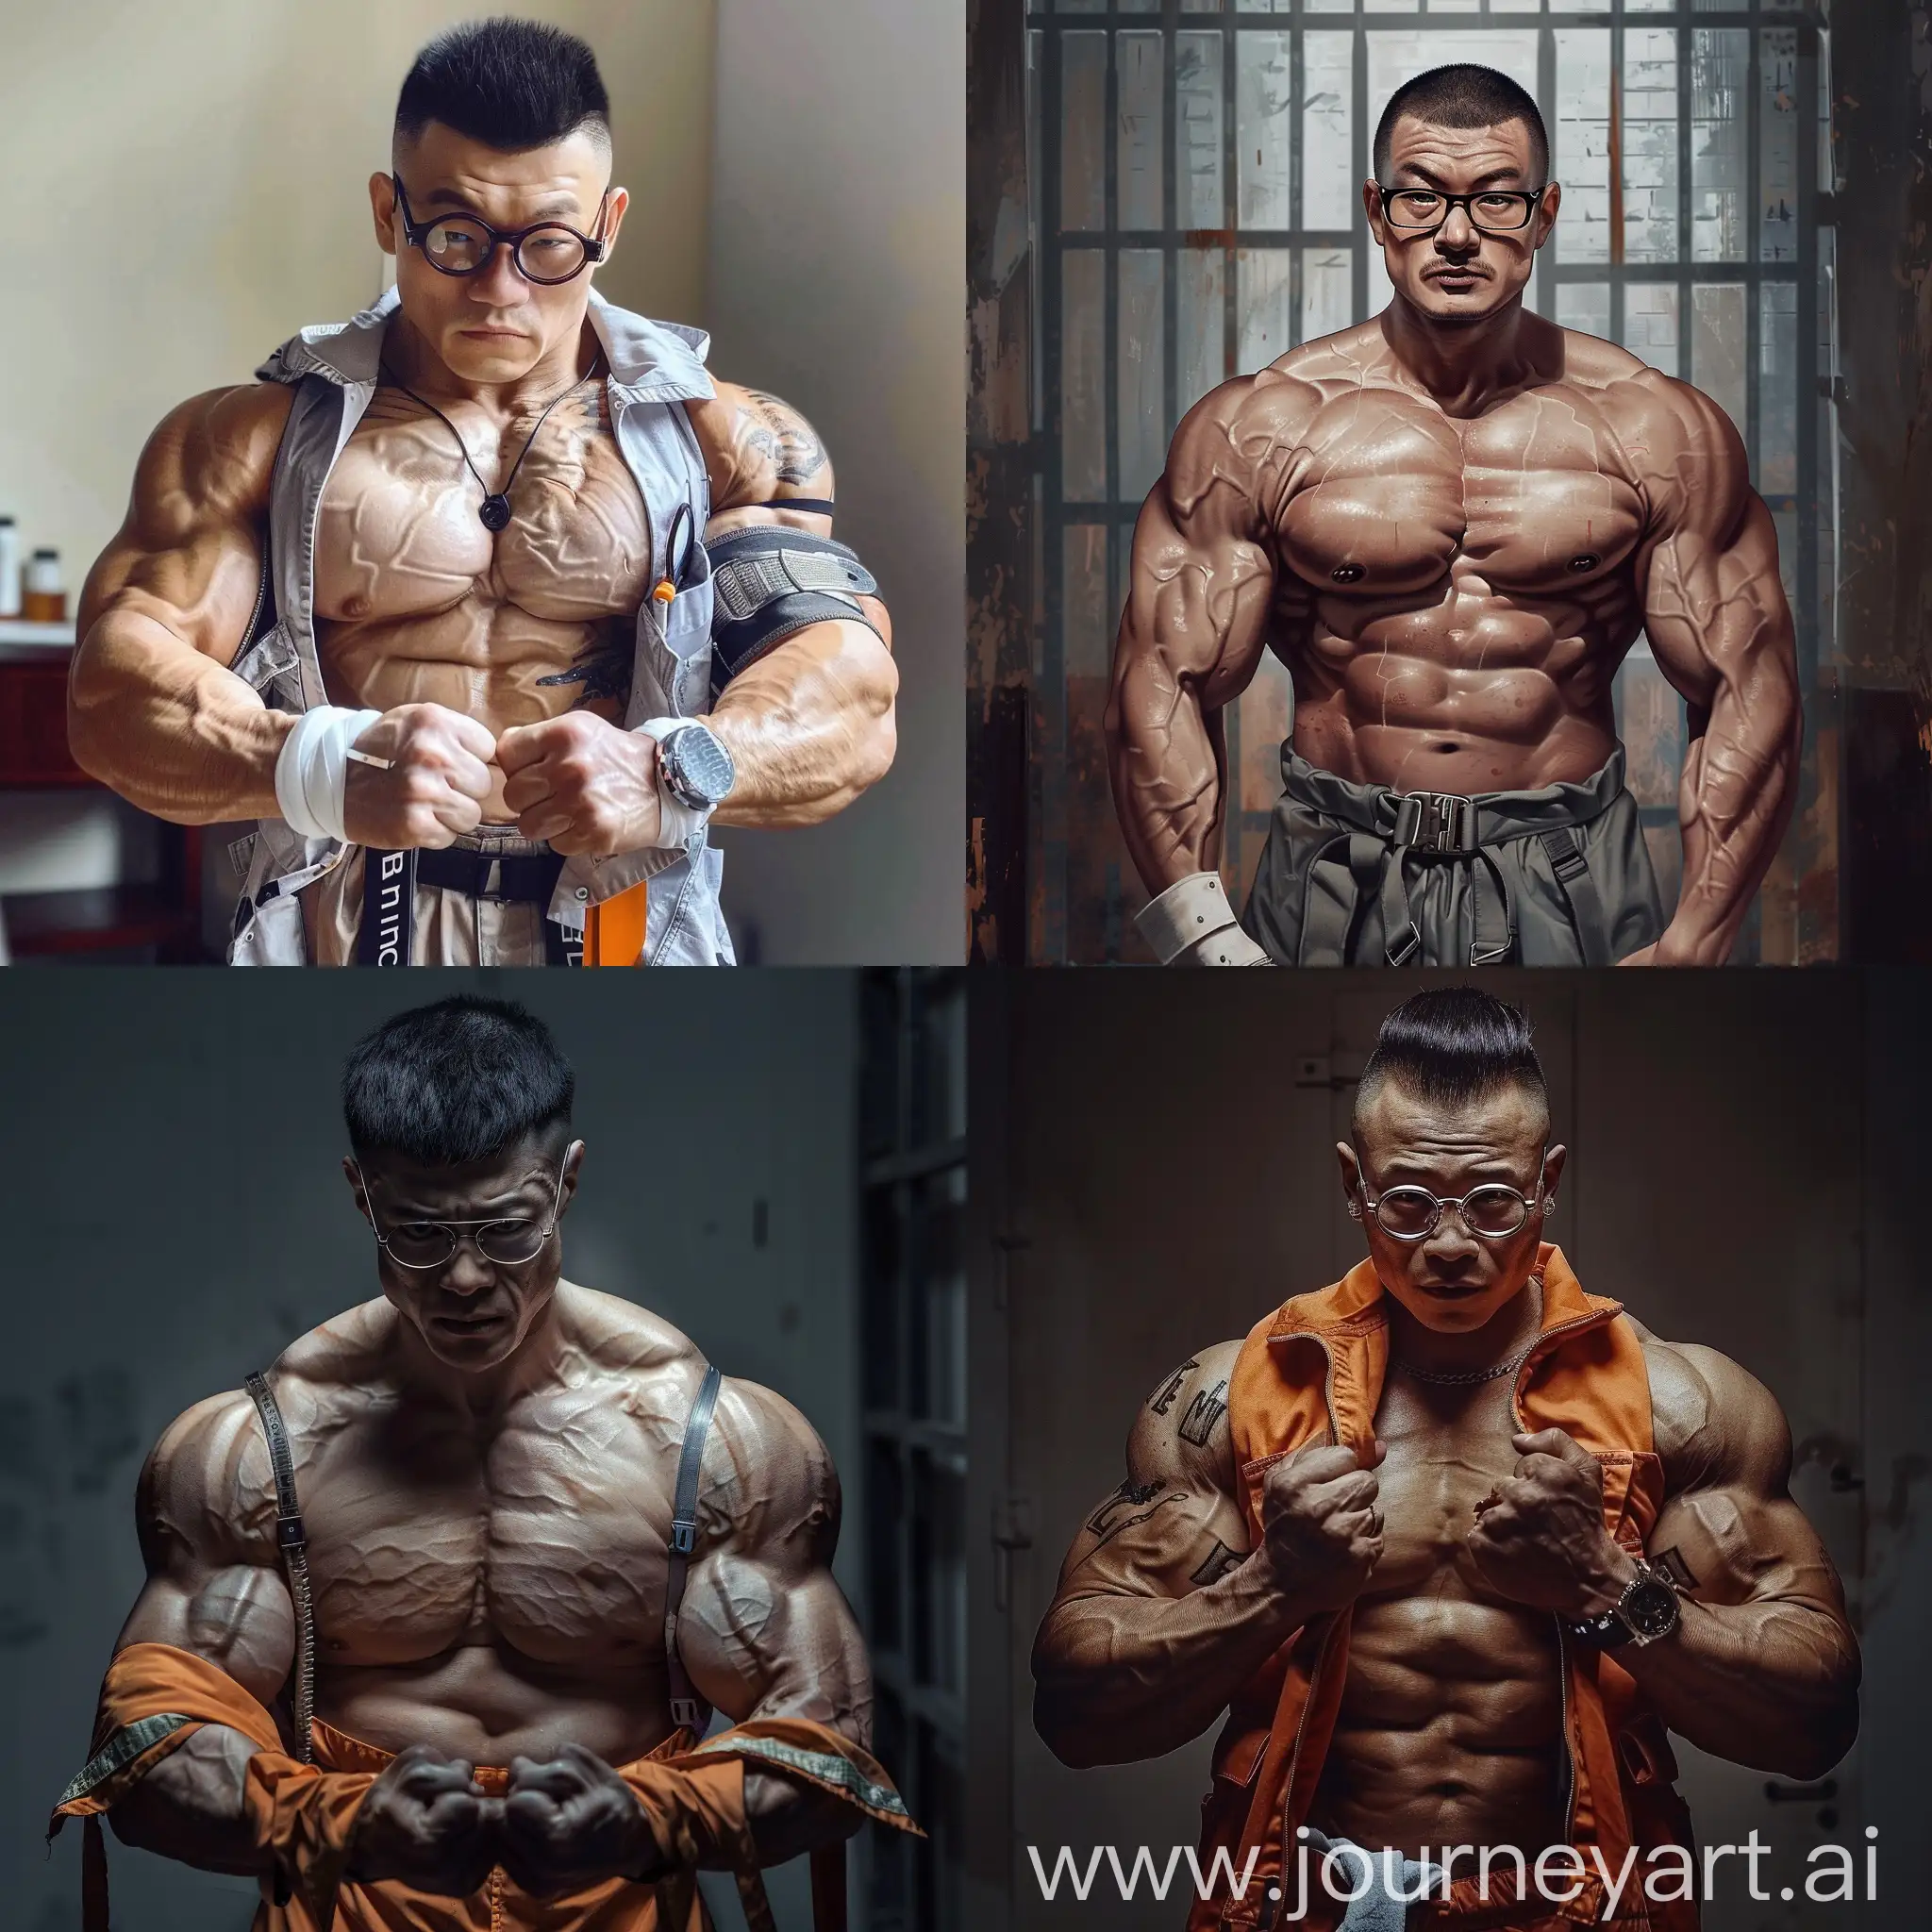 Changpeng-Zhao-CZ-Binance-Flexing-Muscles-in-Prison-Garb-with-Reading-Glasses